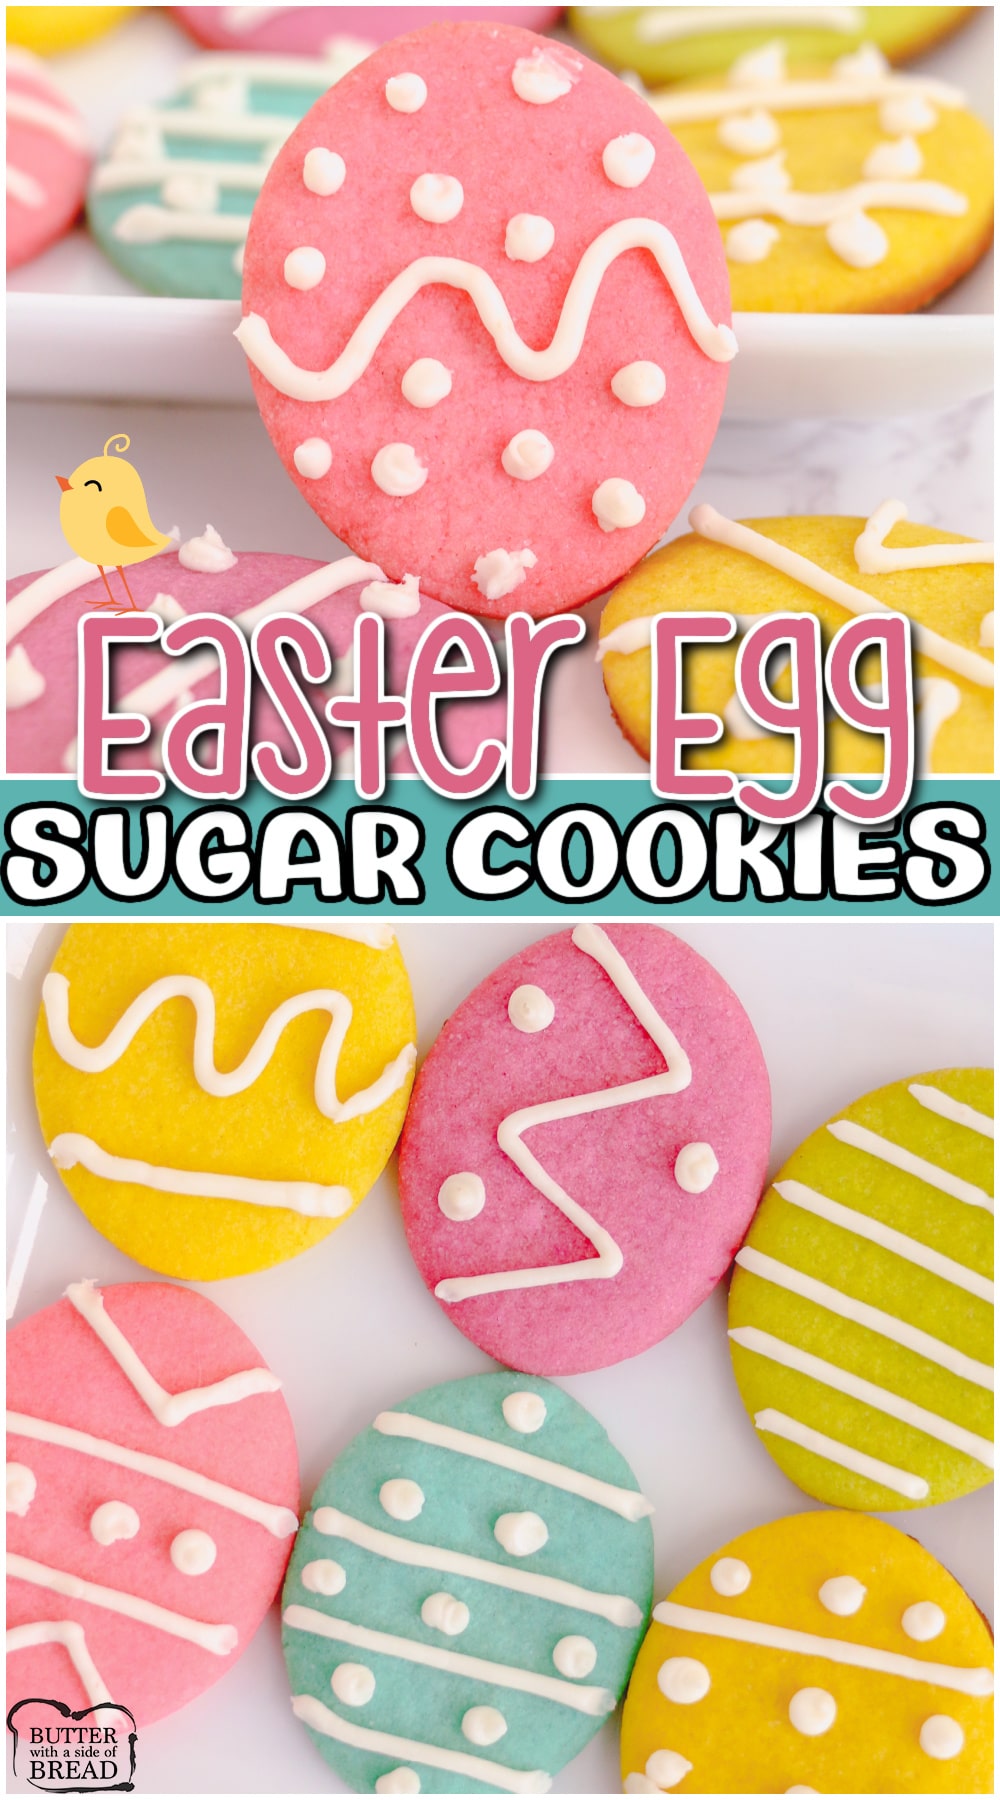 Easter egg sugar cookies are cute & simple lightly frosted cookies perfectly festive for Easter! Made from scratch with basic ingredients these Spring cookies are a fabulous addition to your holiday.